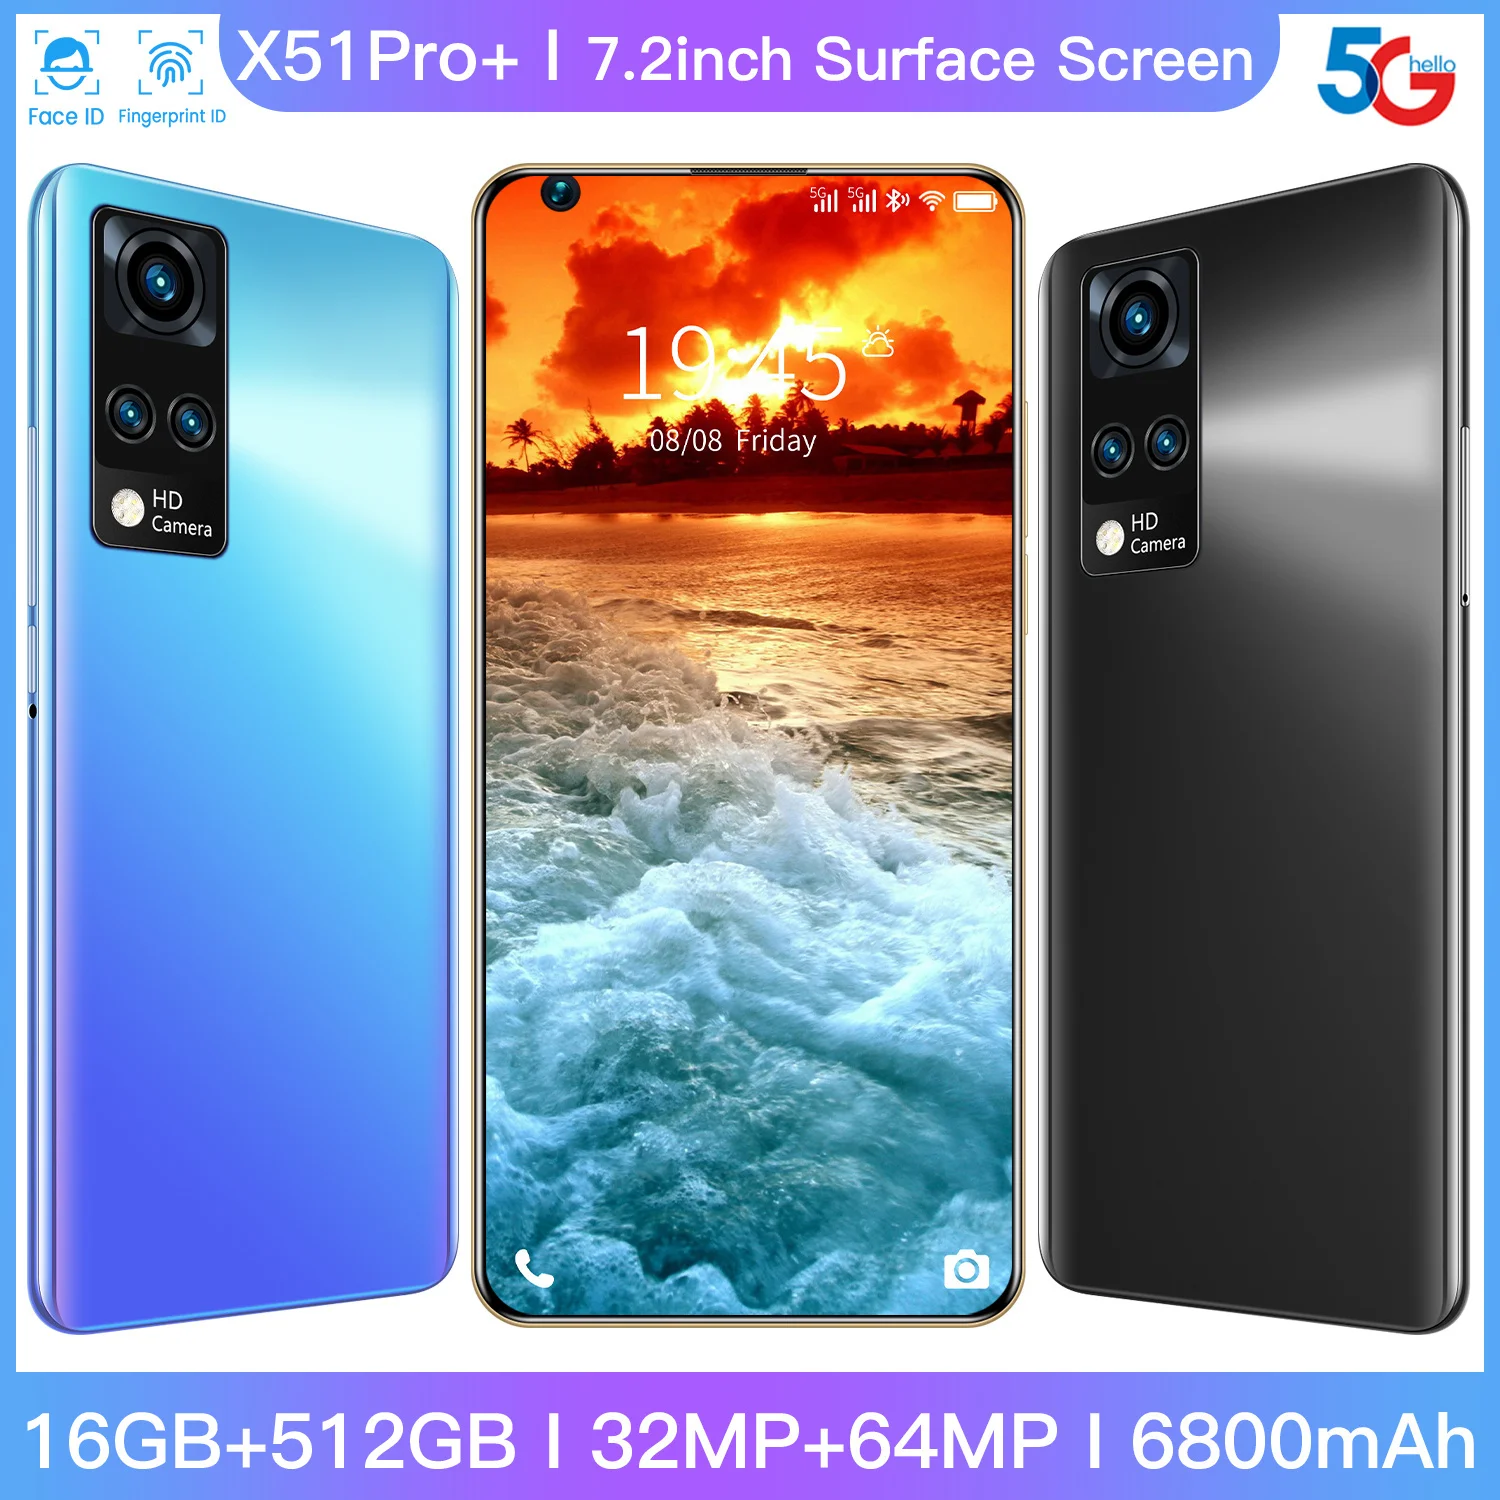 

Global Version X51PRO+ 7.2 Inch Smartphone HD Full Screen 32MP+64MP Camera 16GB+512GB 6800mAh Big Battery Android Cell Phone